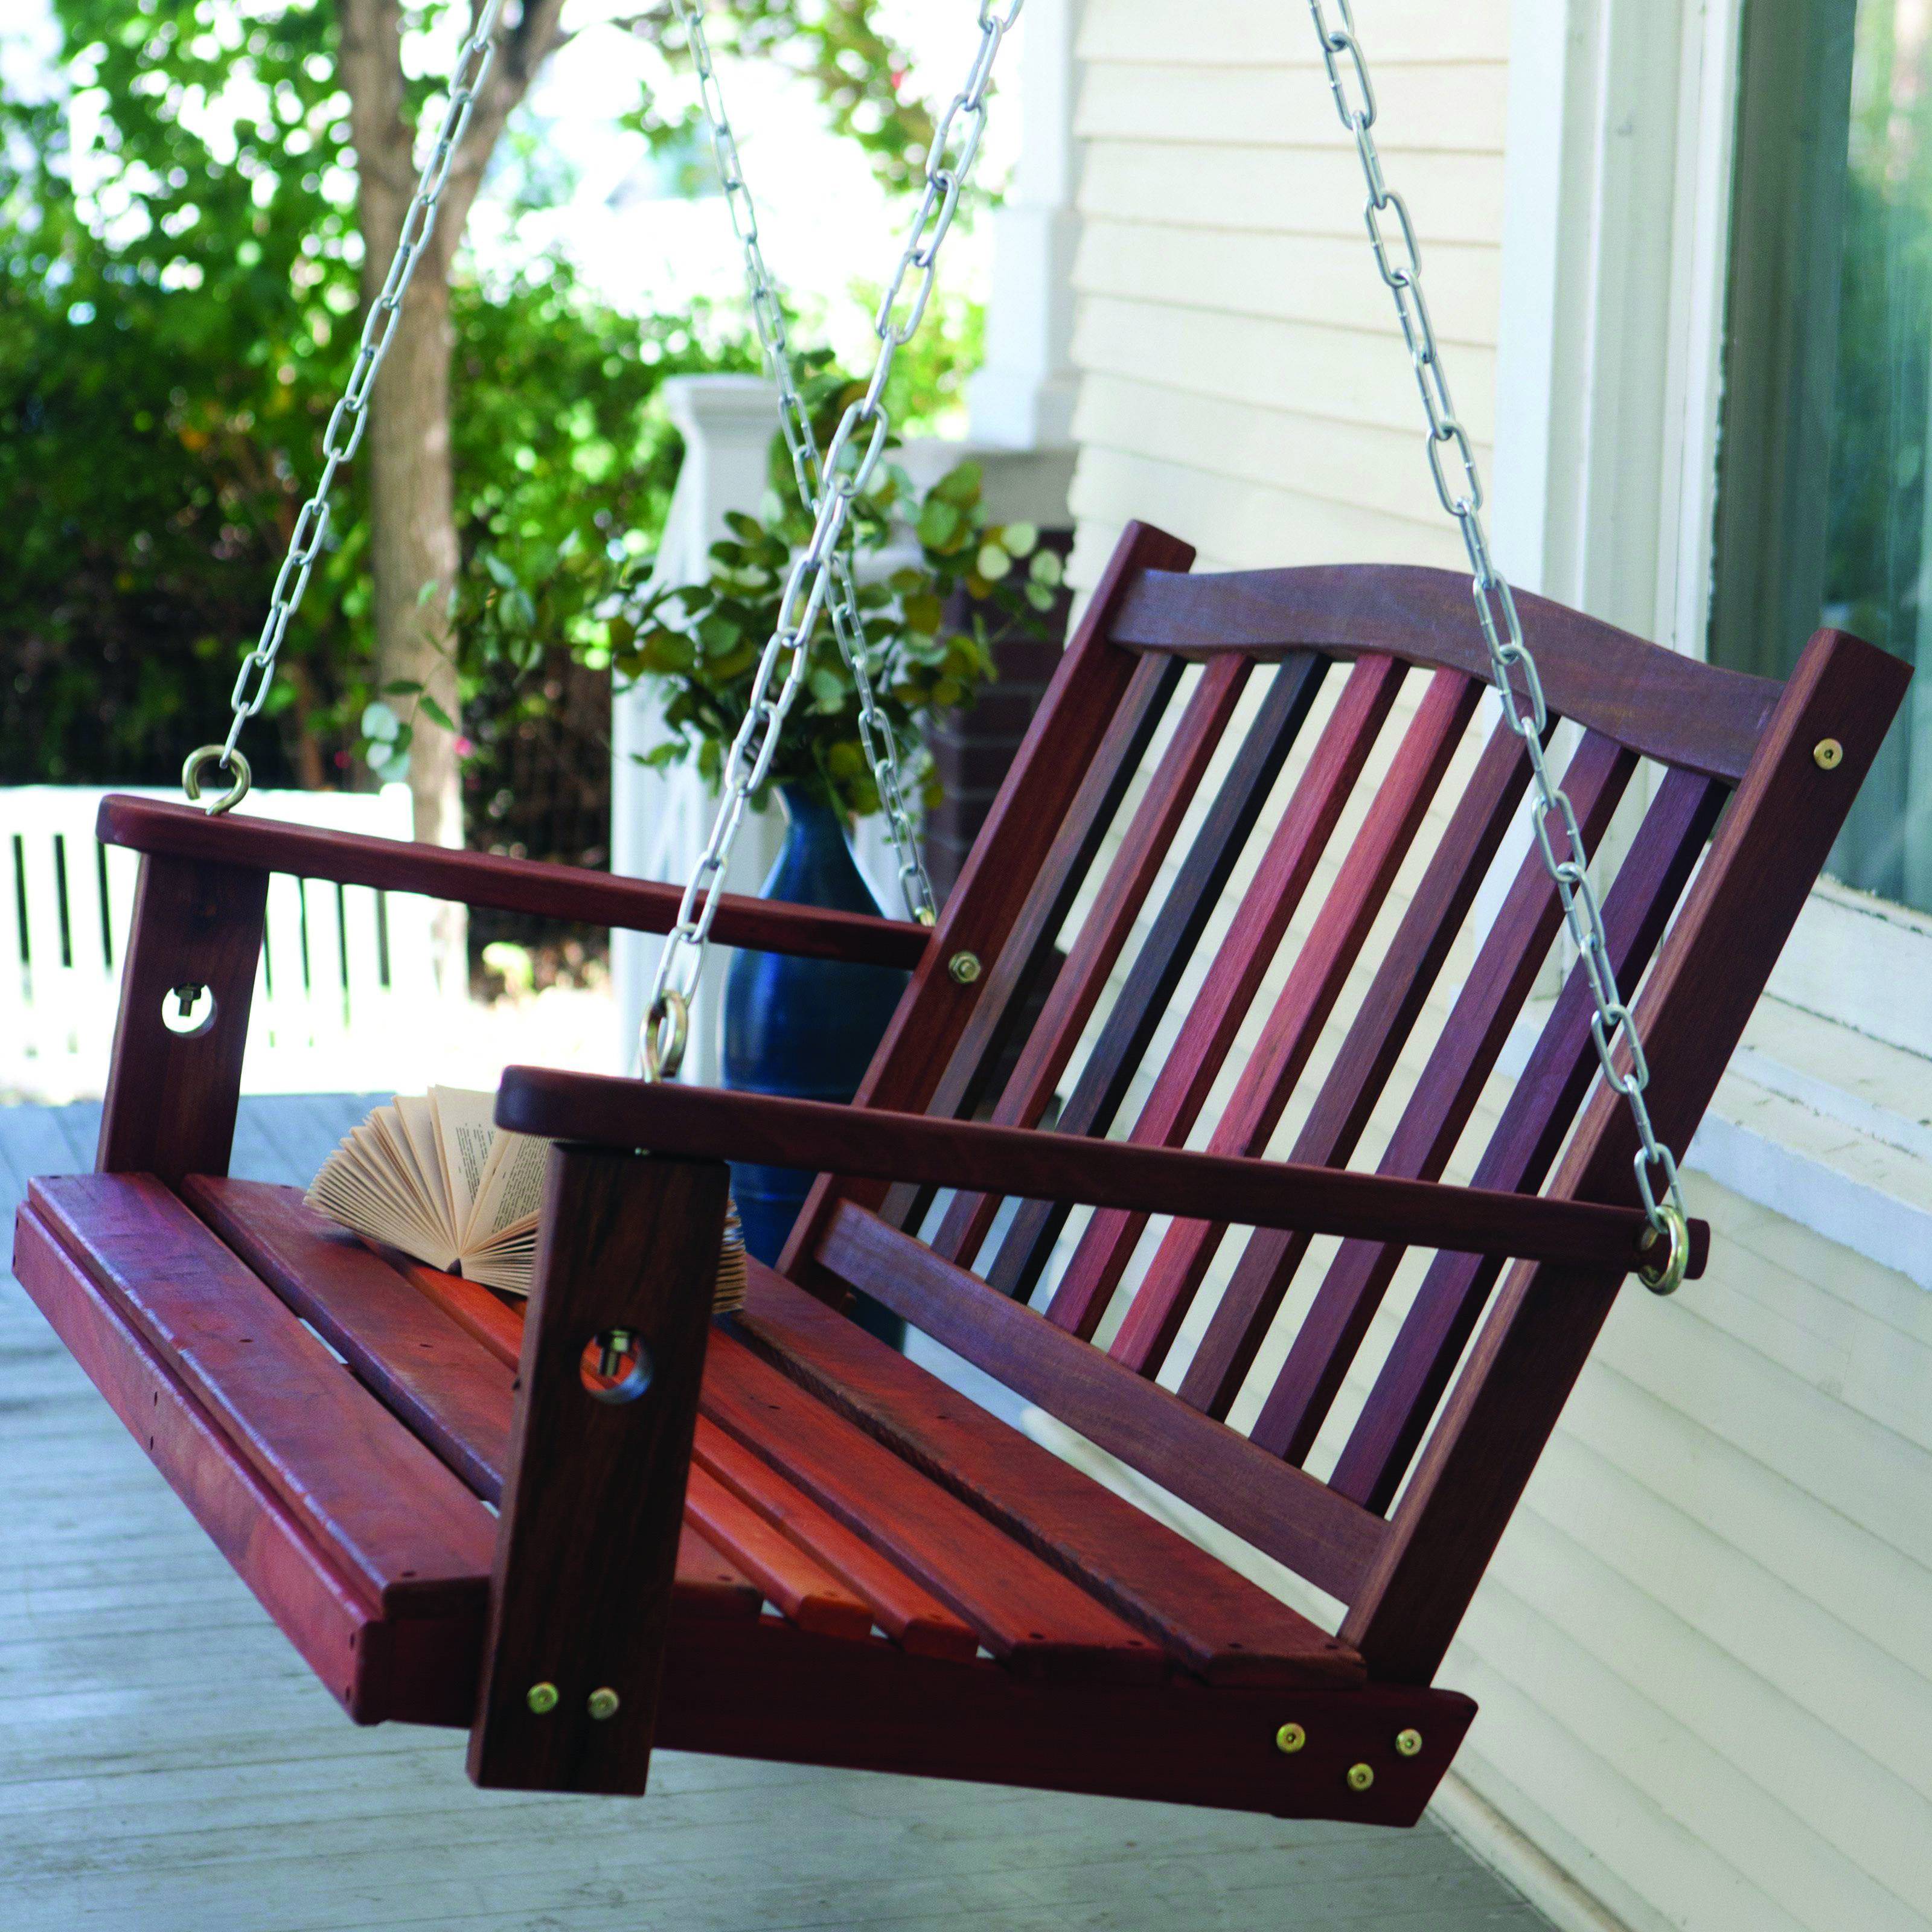 Free Standing Porch Swing Design Porch Swing Frame